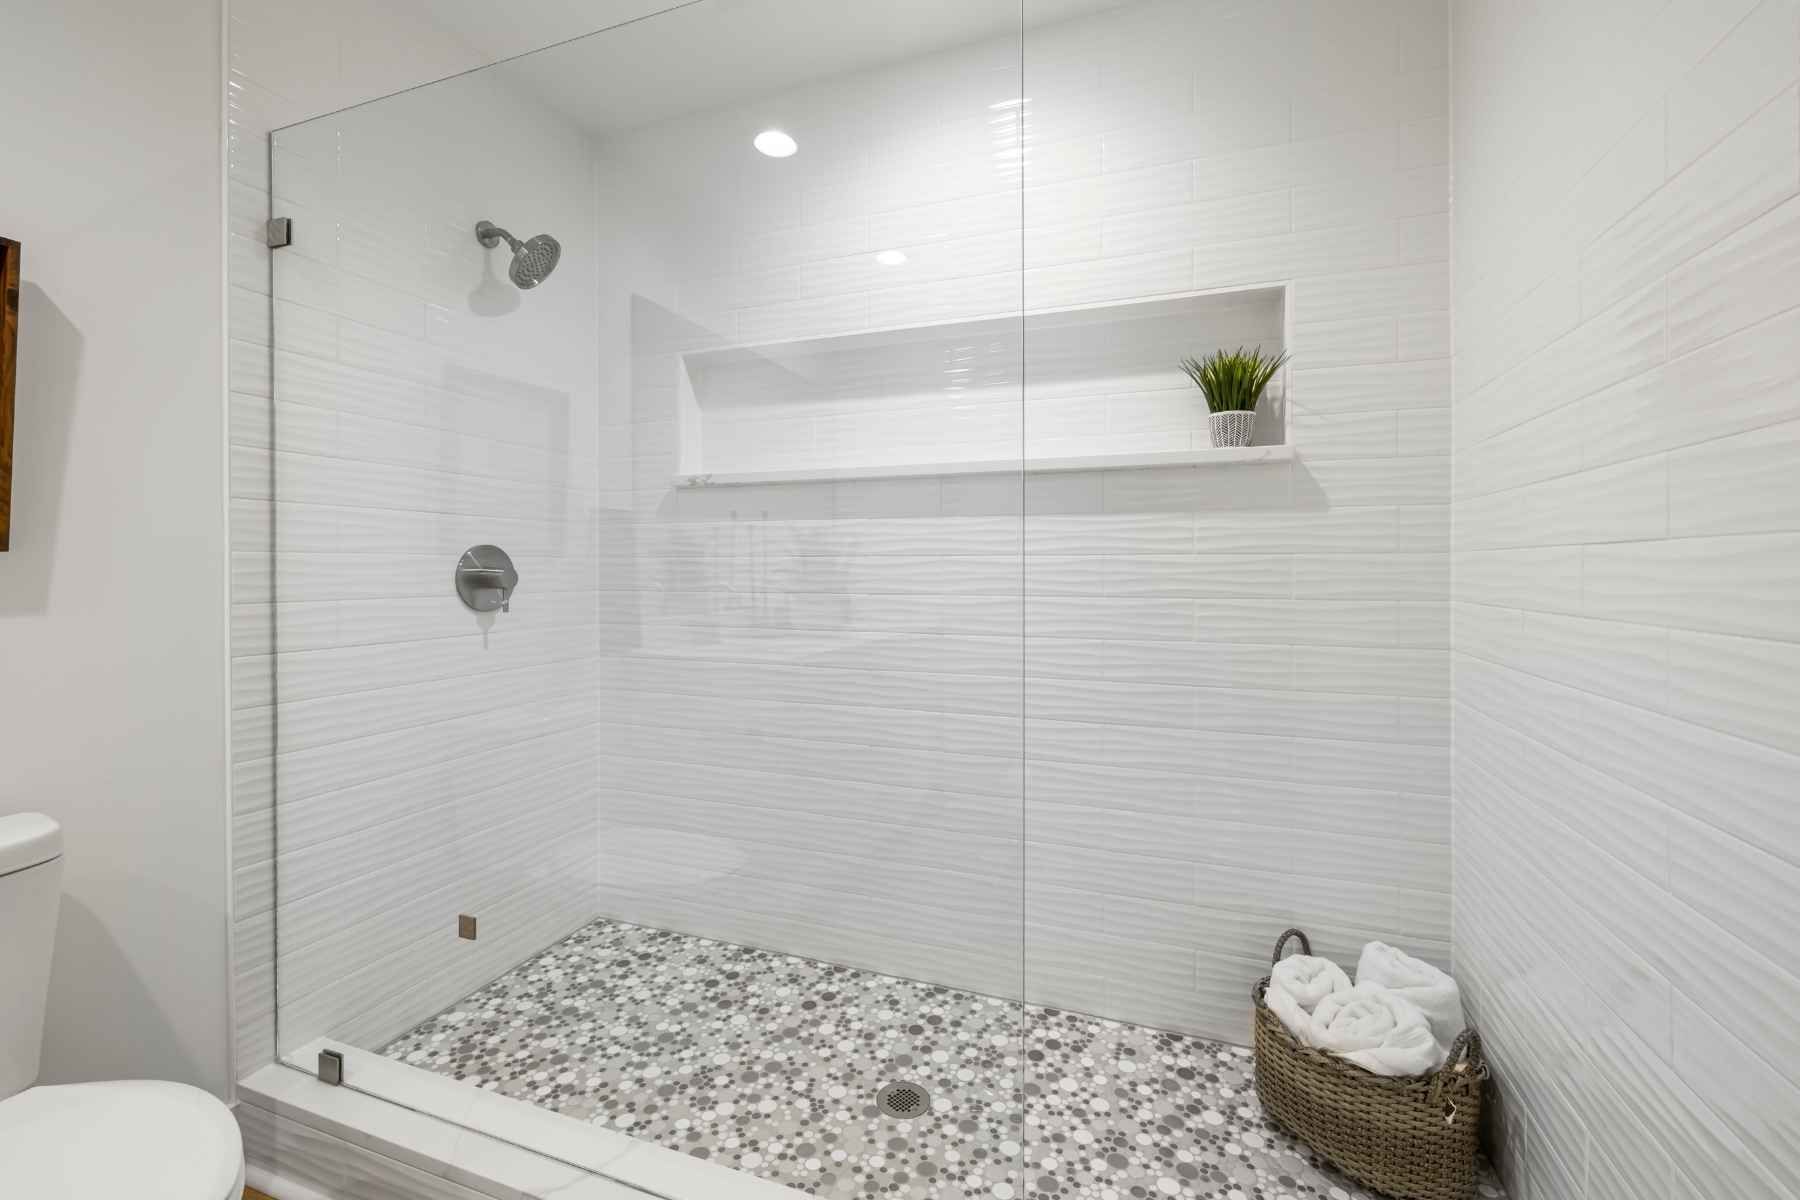 Tub-to-Shower conversions